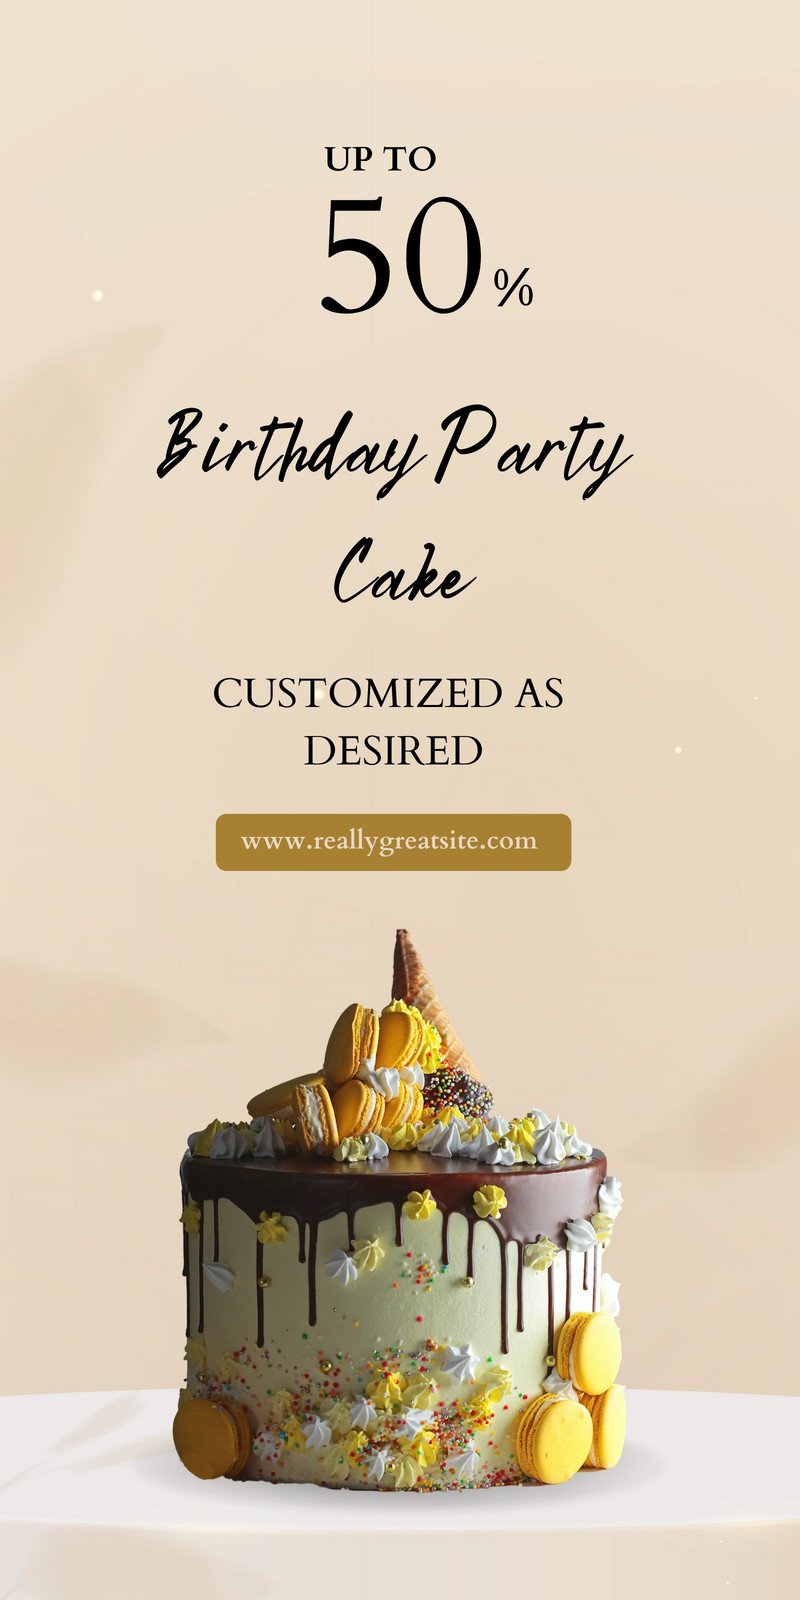 Banner design of sweet bakery delicious cake